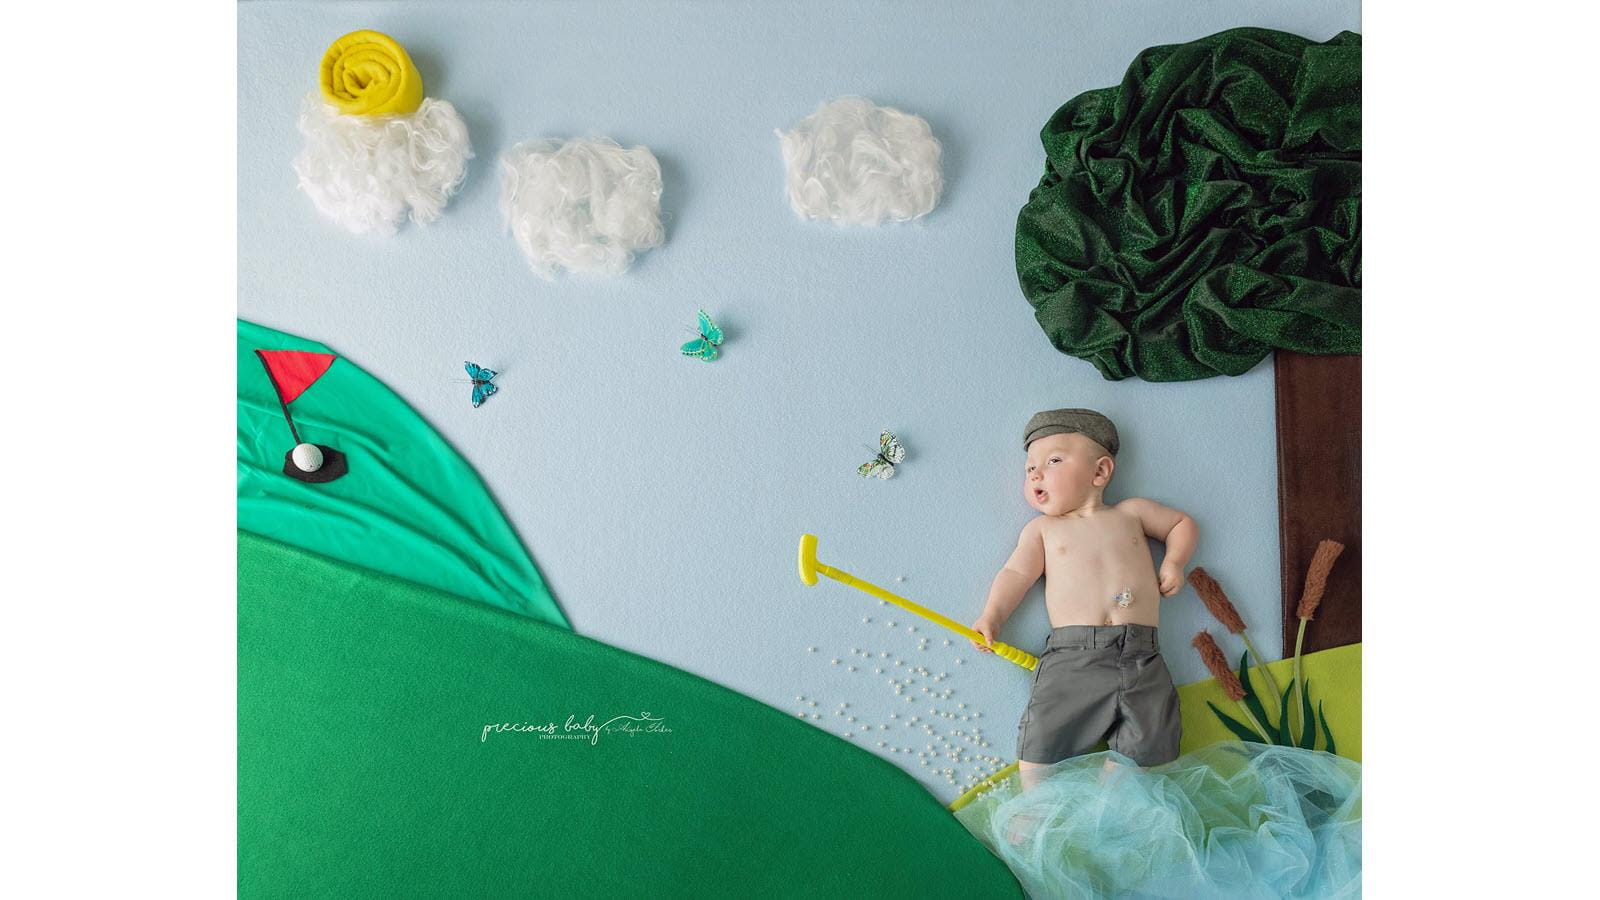 Baby holding a golf club in a whimsical scene